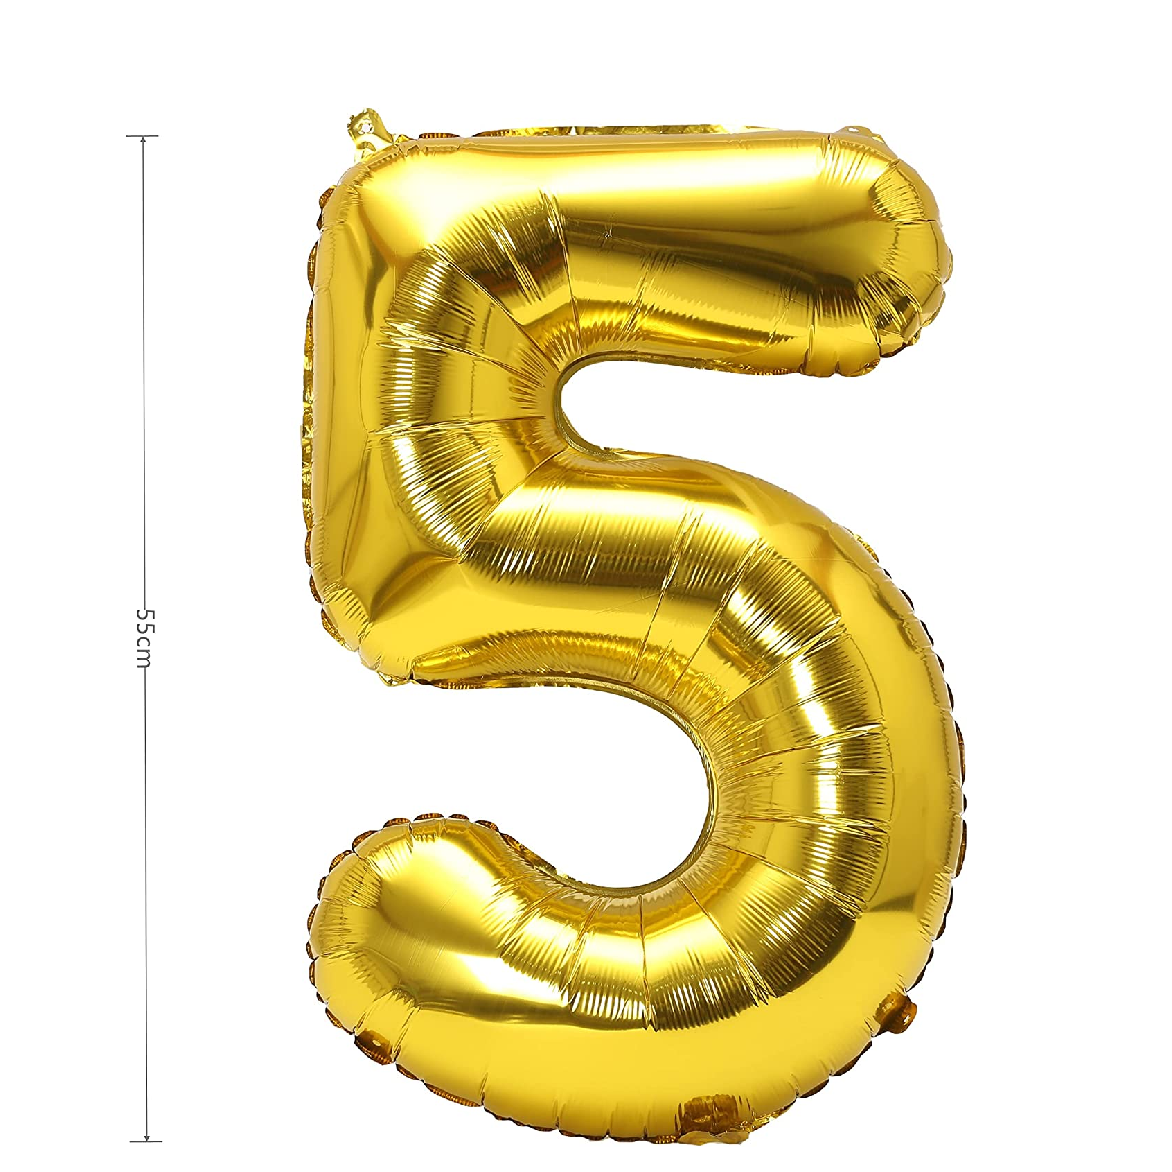 Party Decoration Balloon - 32 Inch Gold #5